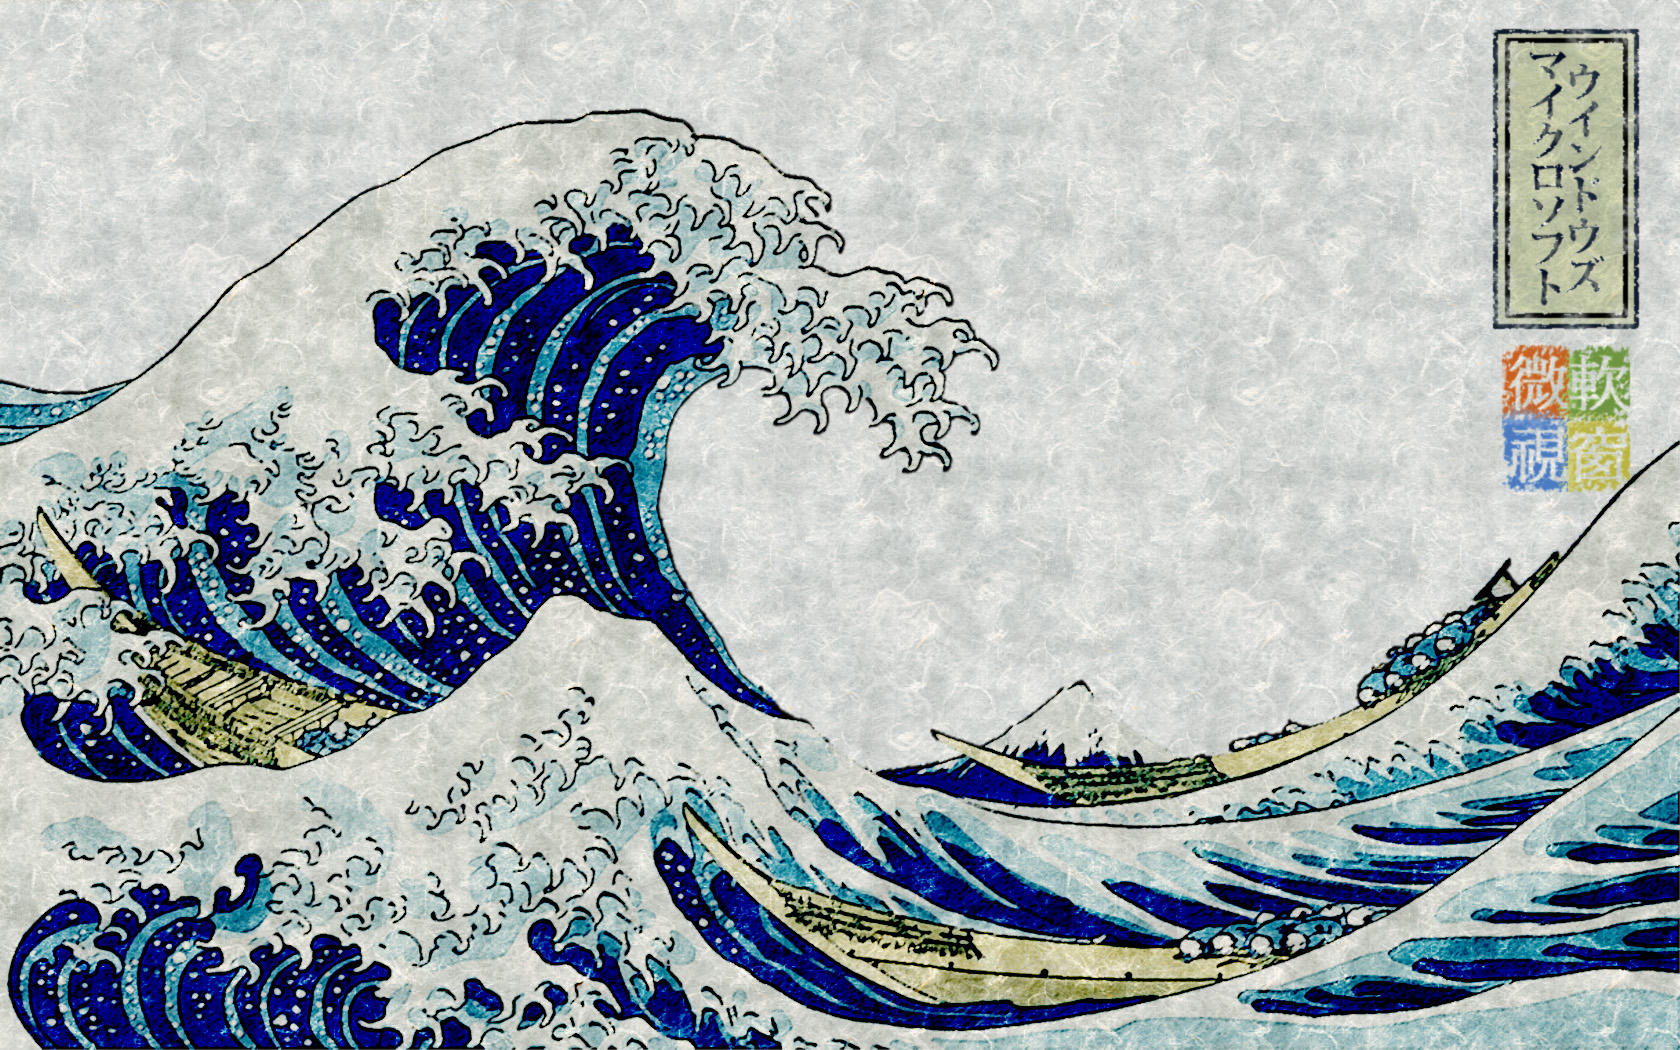 Hokusai__s_The_Great_XP_by_AndoOKC.jpg